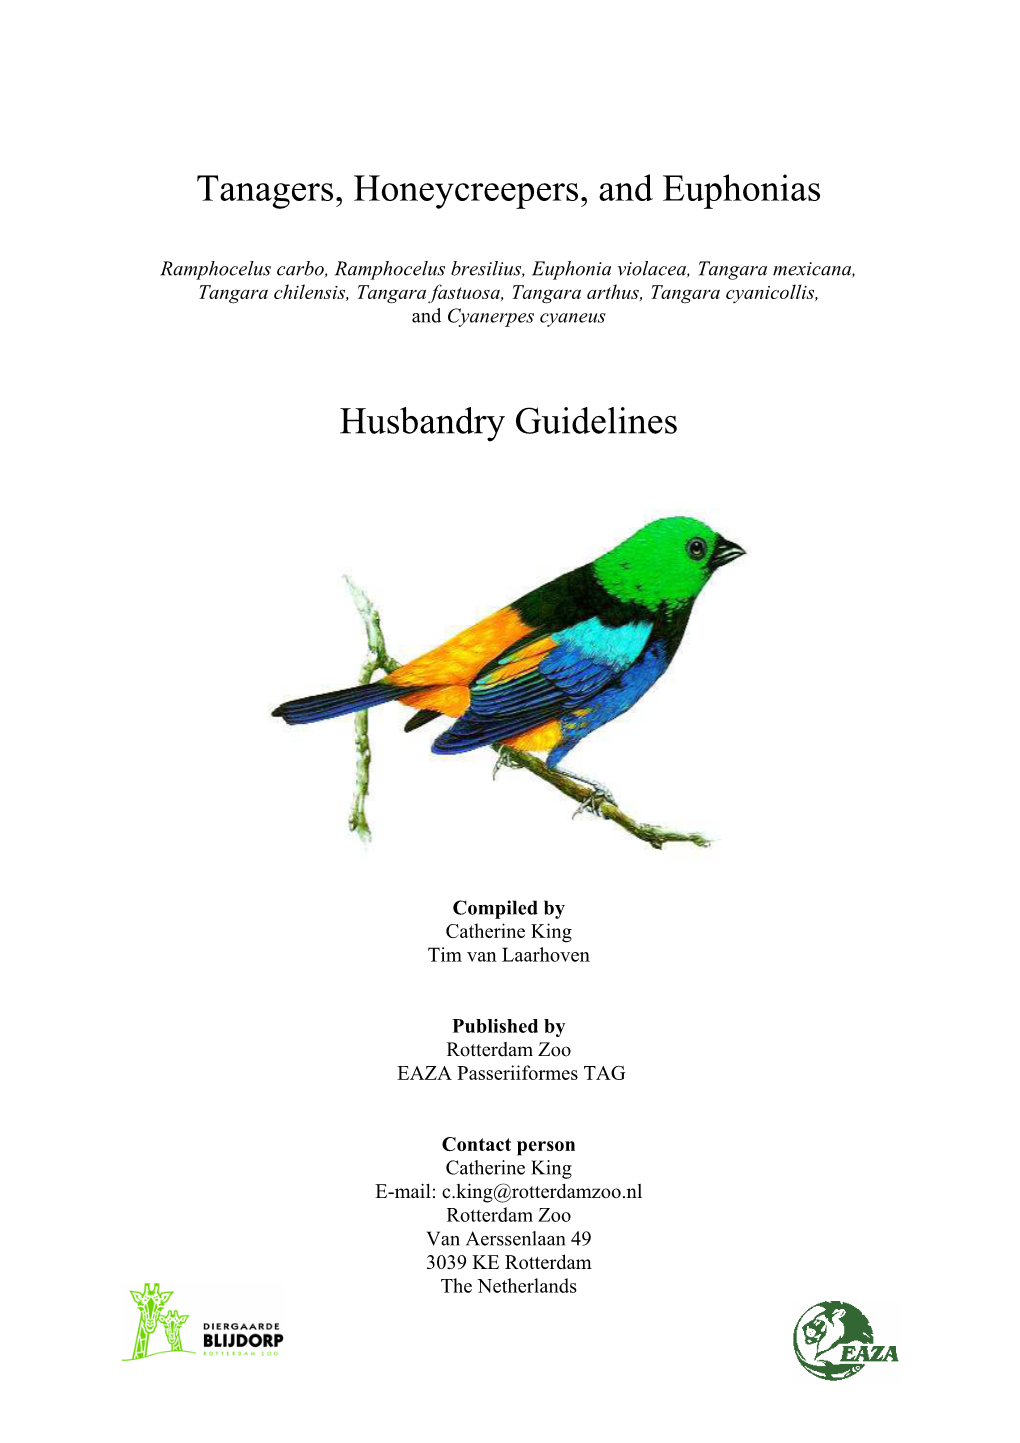 Tanagers, Honeycreepers, and Euphonias Husbandry Guidelines